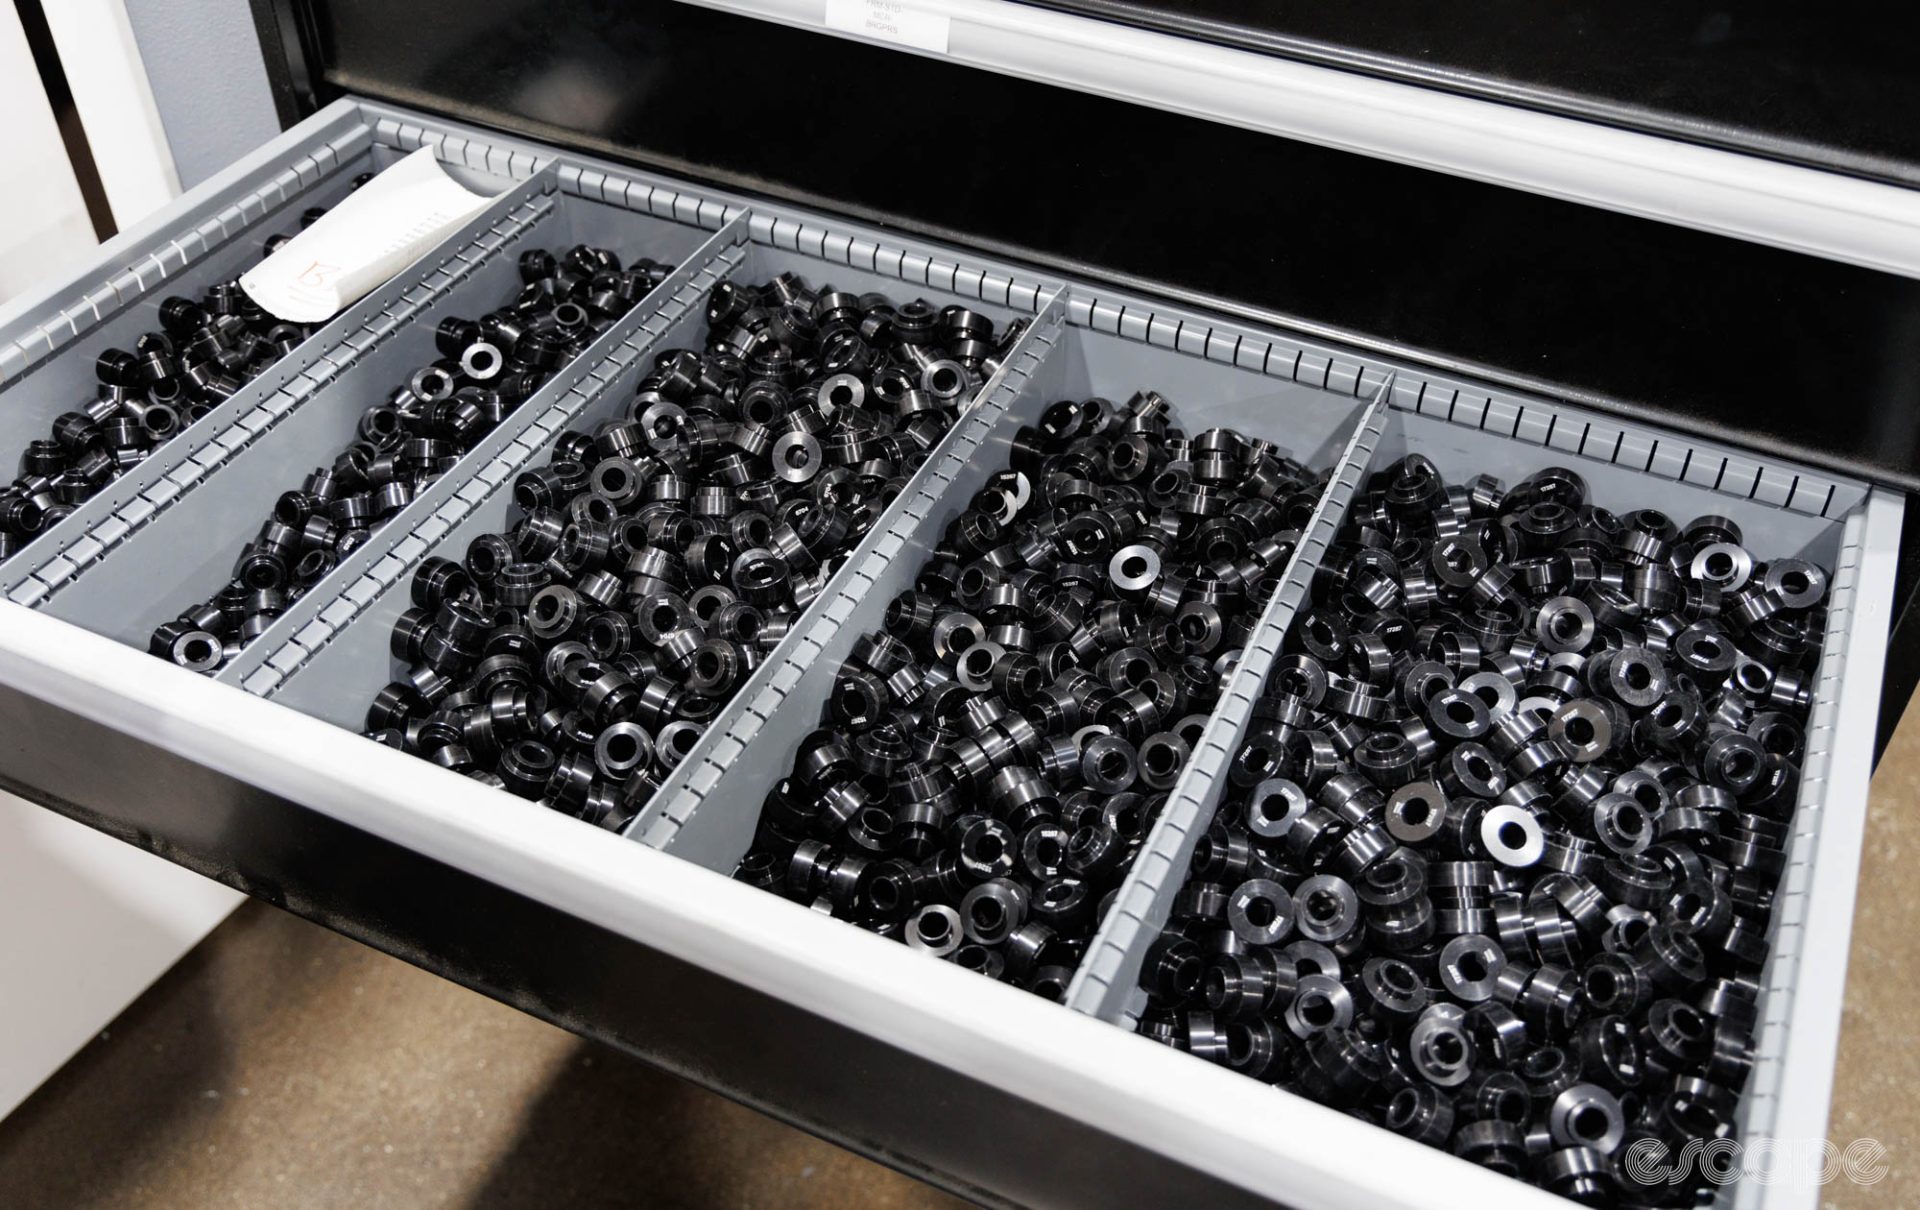 More trays, this time with dark grey drifts for various bearings used in conjunction with Abbey's bearing press.